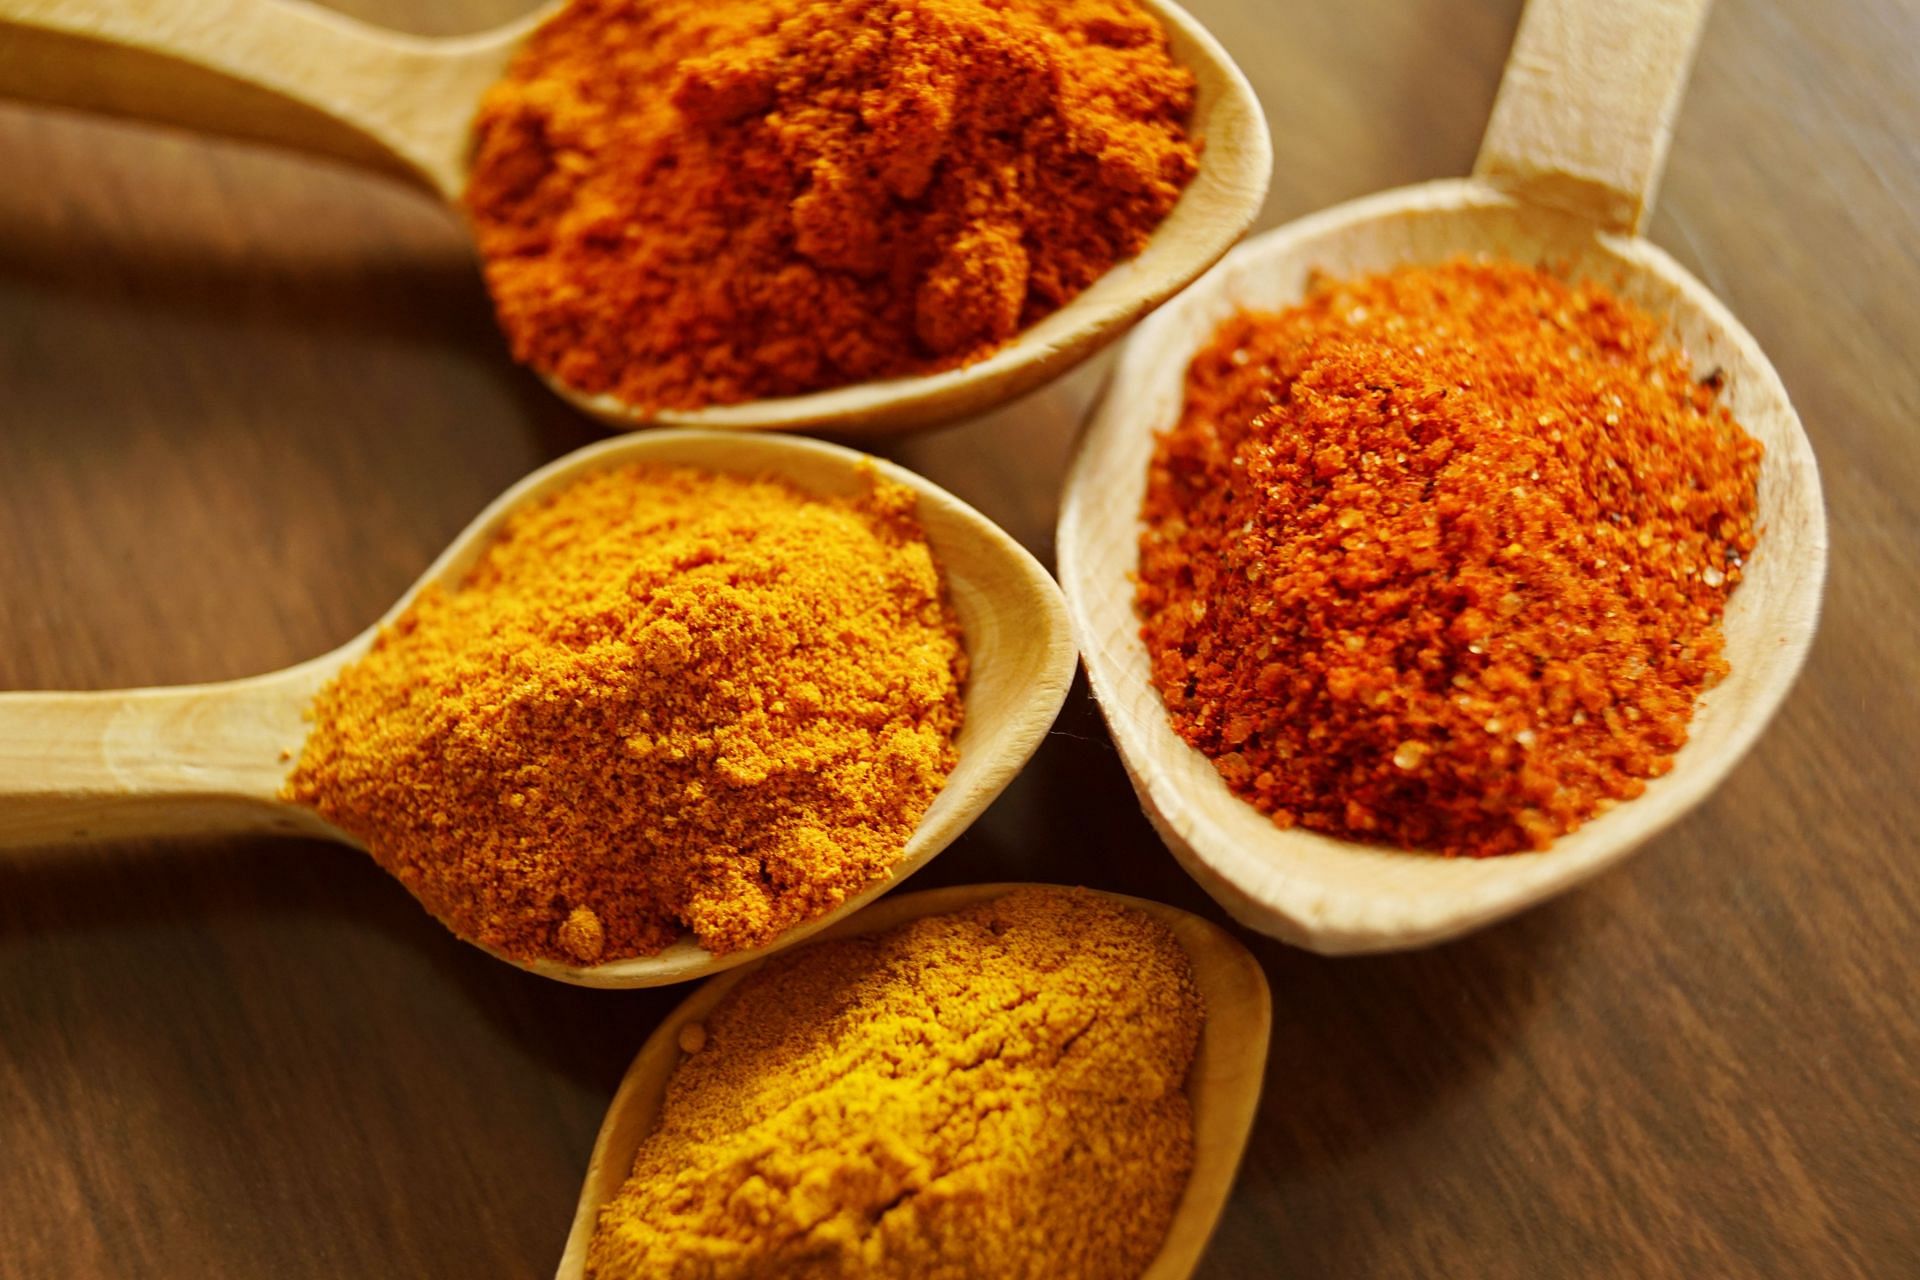 Turmeric is also one of the best home remedies for migraine. (Image via Pexels / Marta Branco)